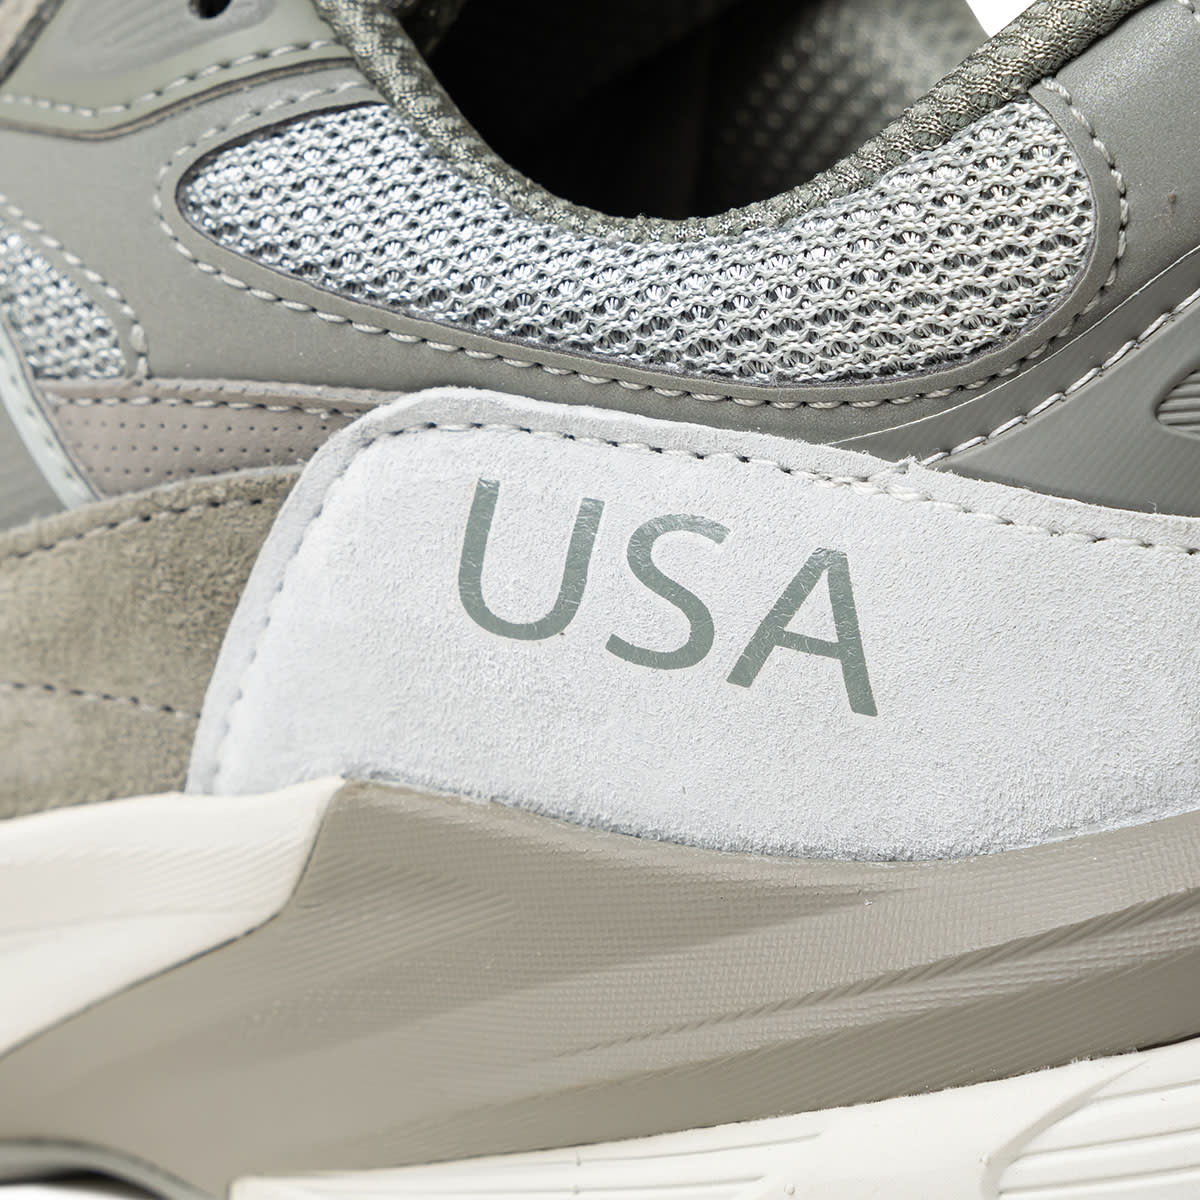 New Balance x WTAPS 990 V6 (Moon Mist) | END. Launches